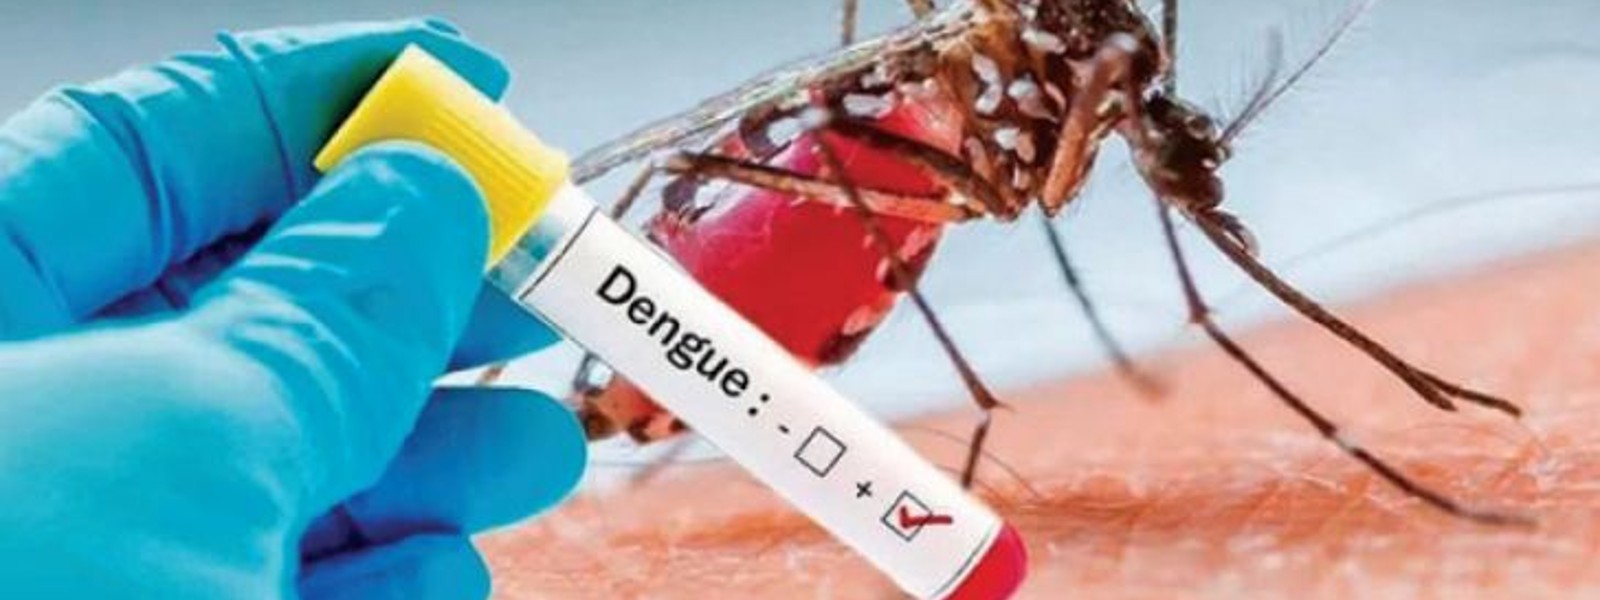 Dengue on the rise